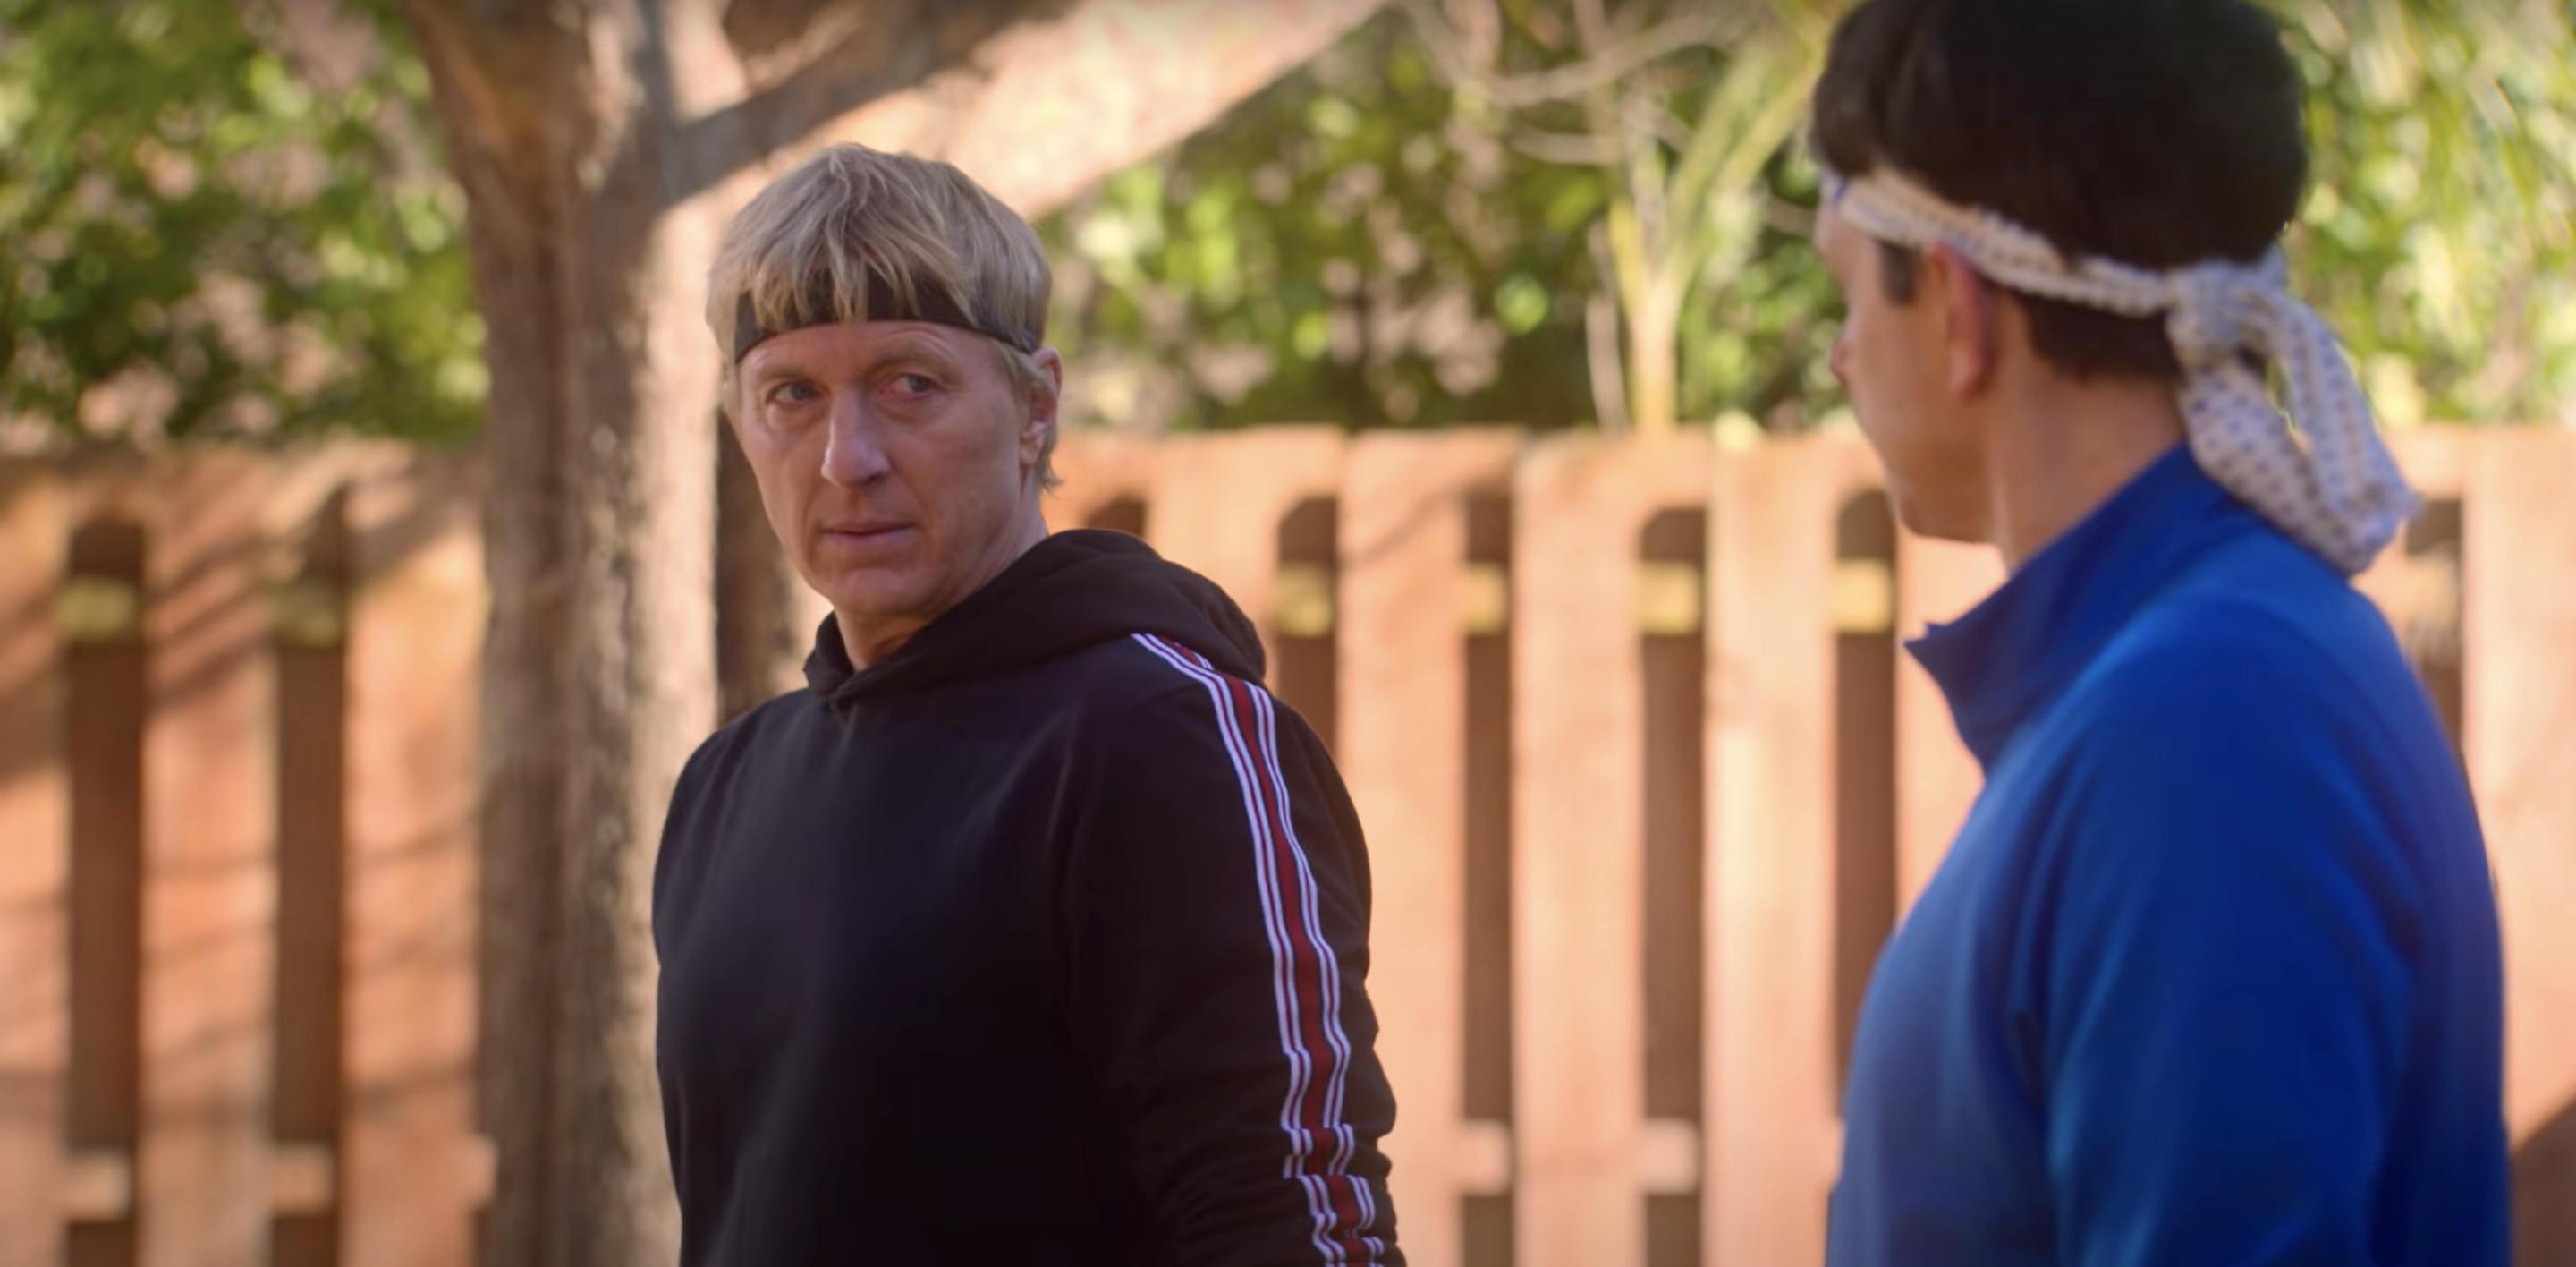 Cobra Kai season 4: release date, cast, trailer, and everything